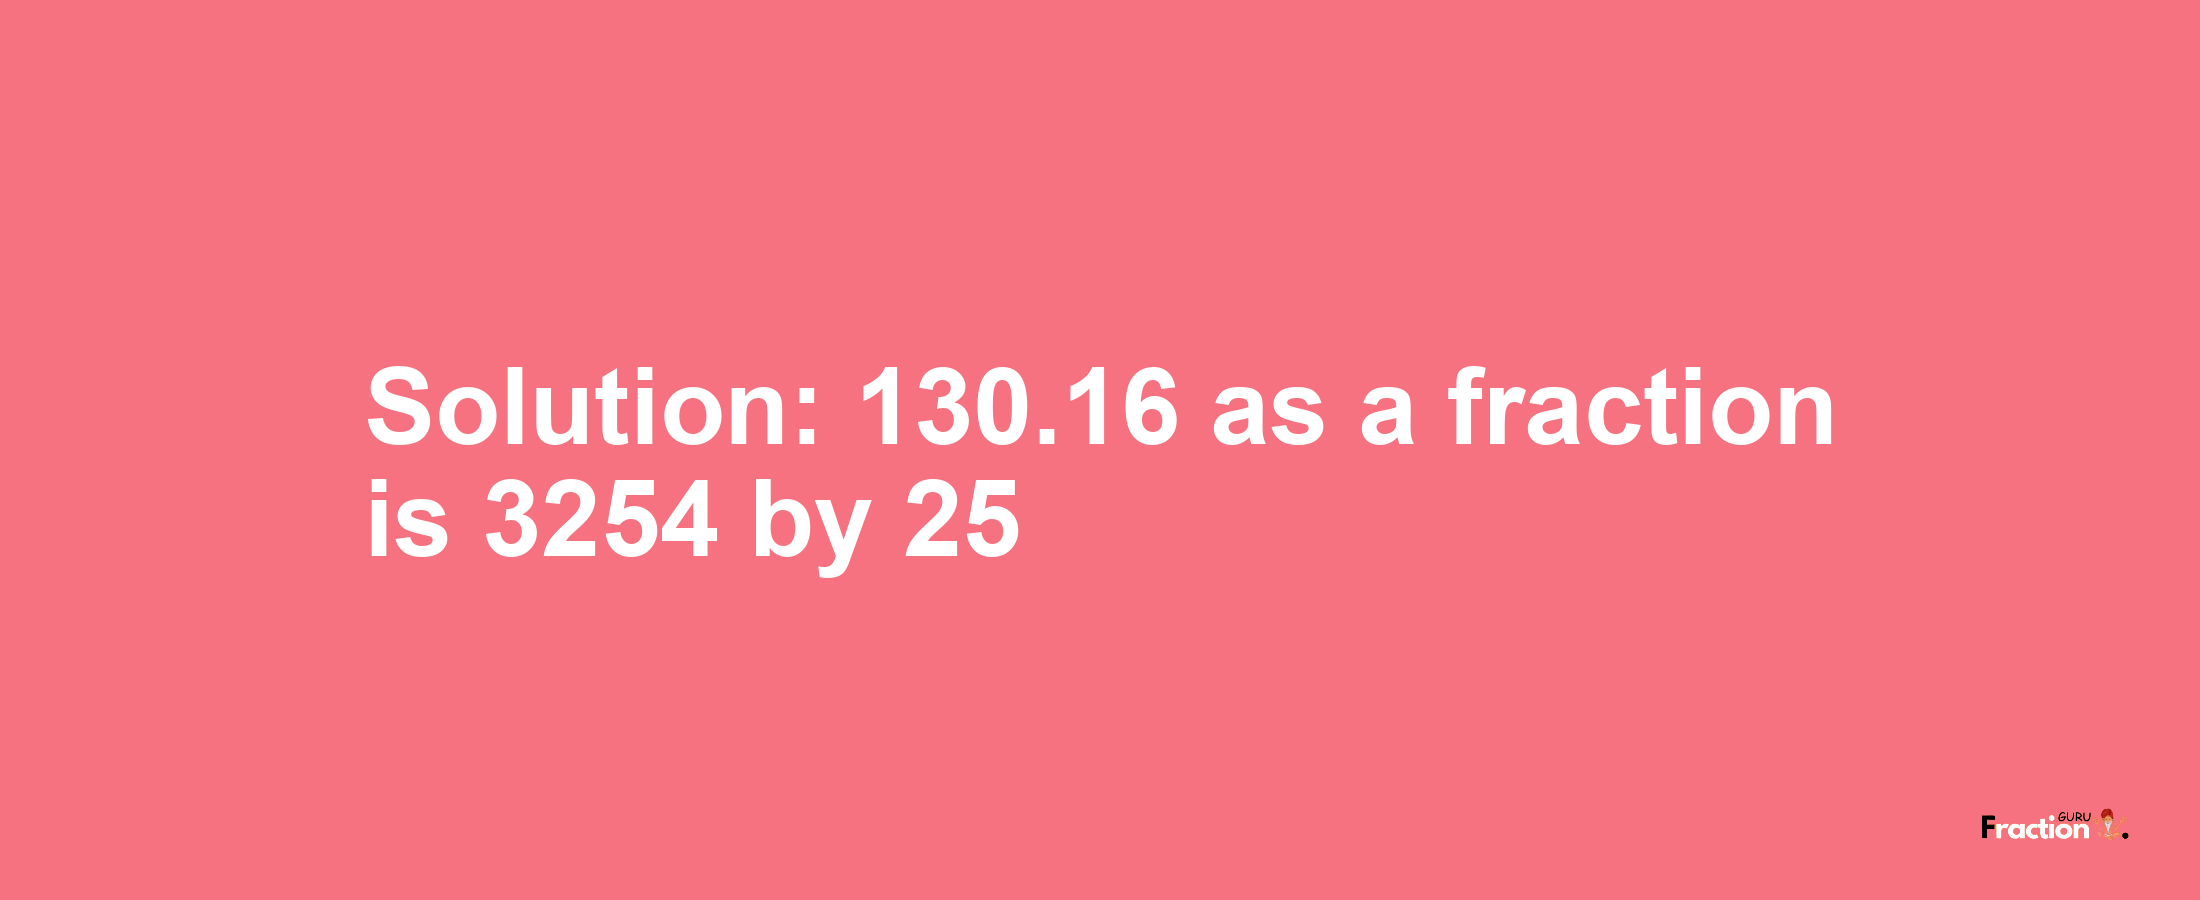 Solution:130.16 as a fraction is 3254/25